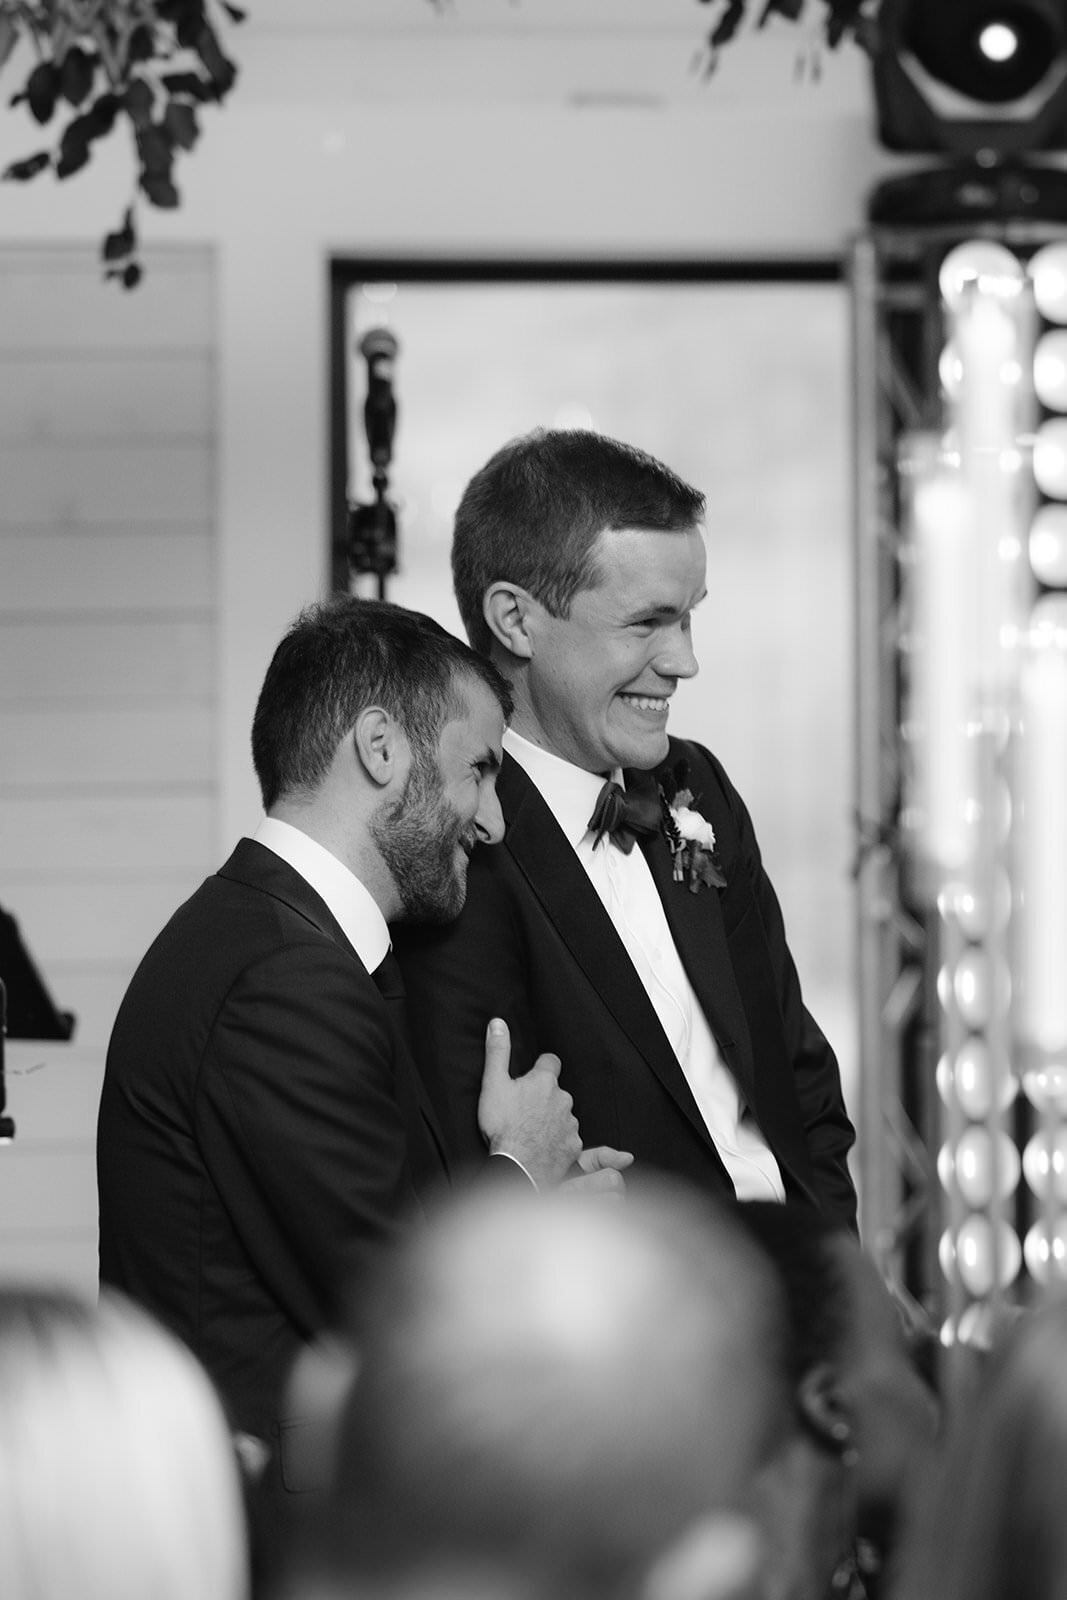 Two grooms hold each other smiling during wedding toasts